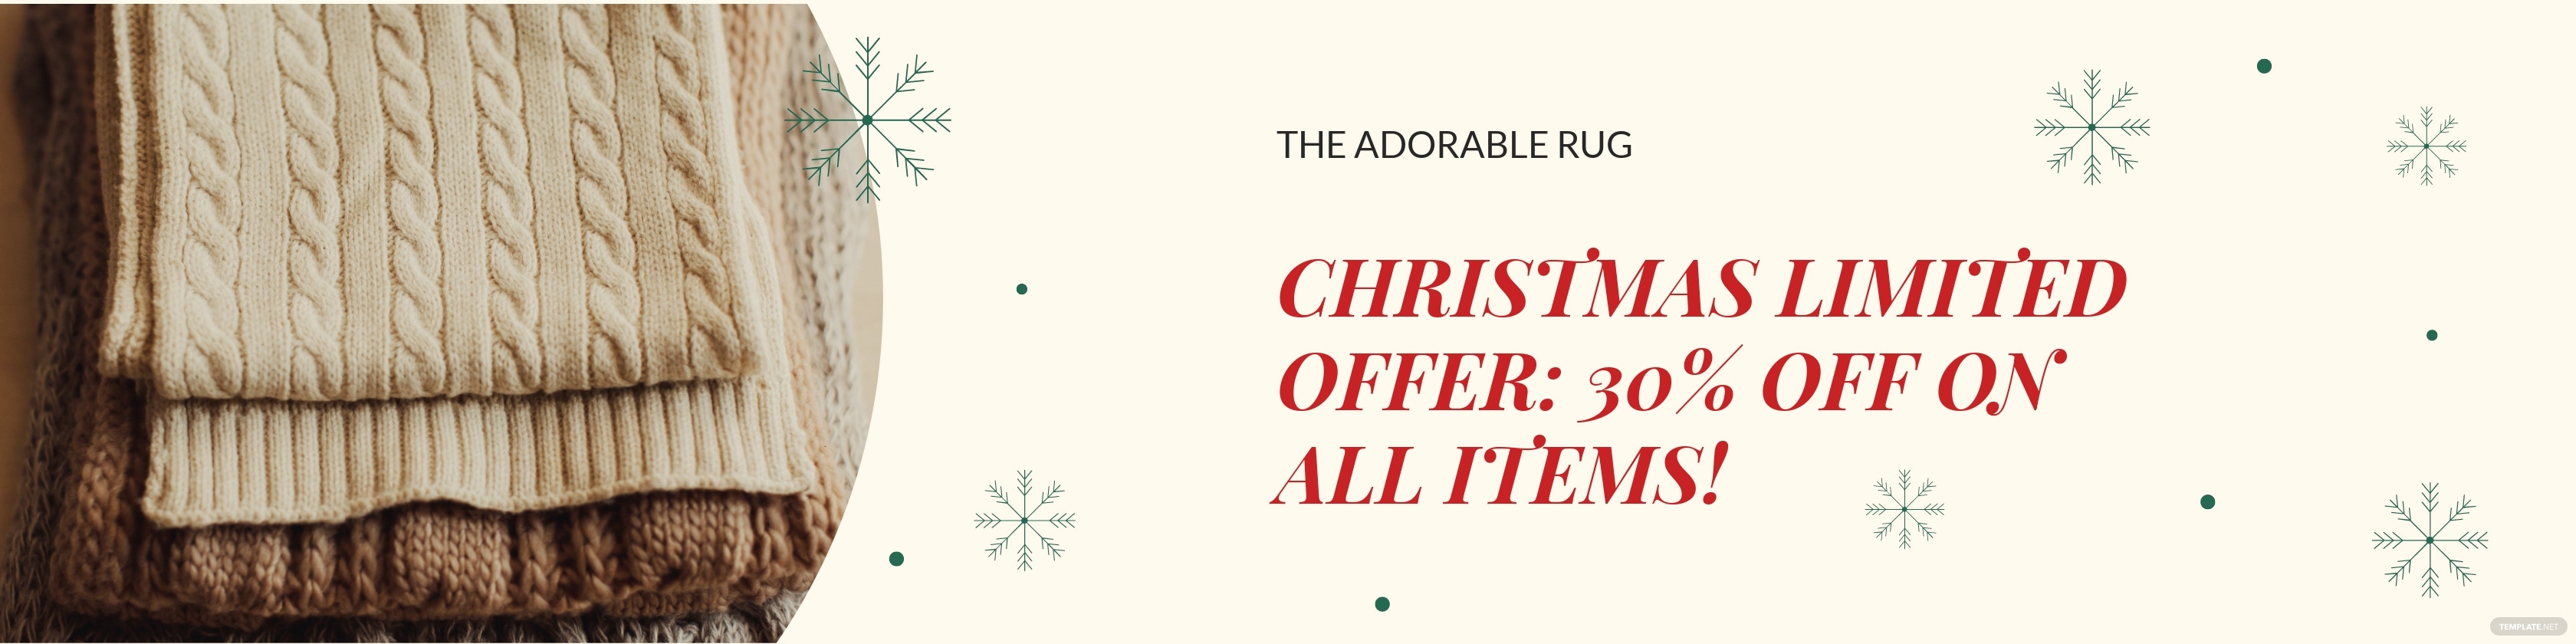 christmas etsy shop banner ideas and examples